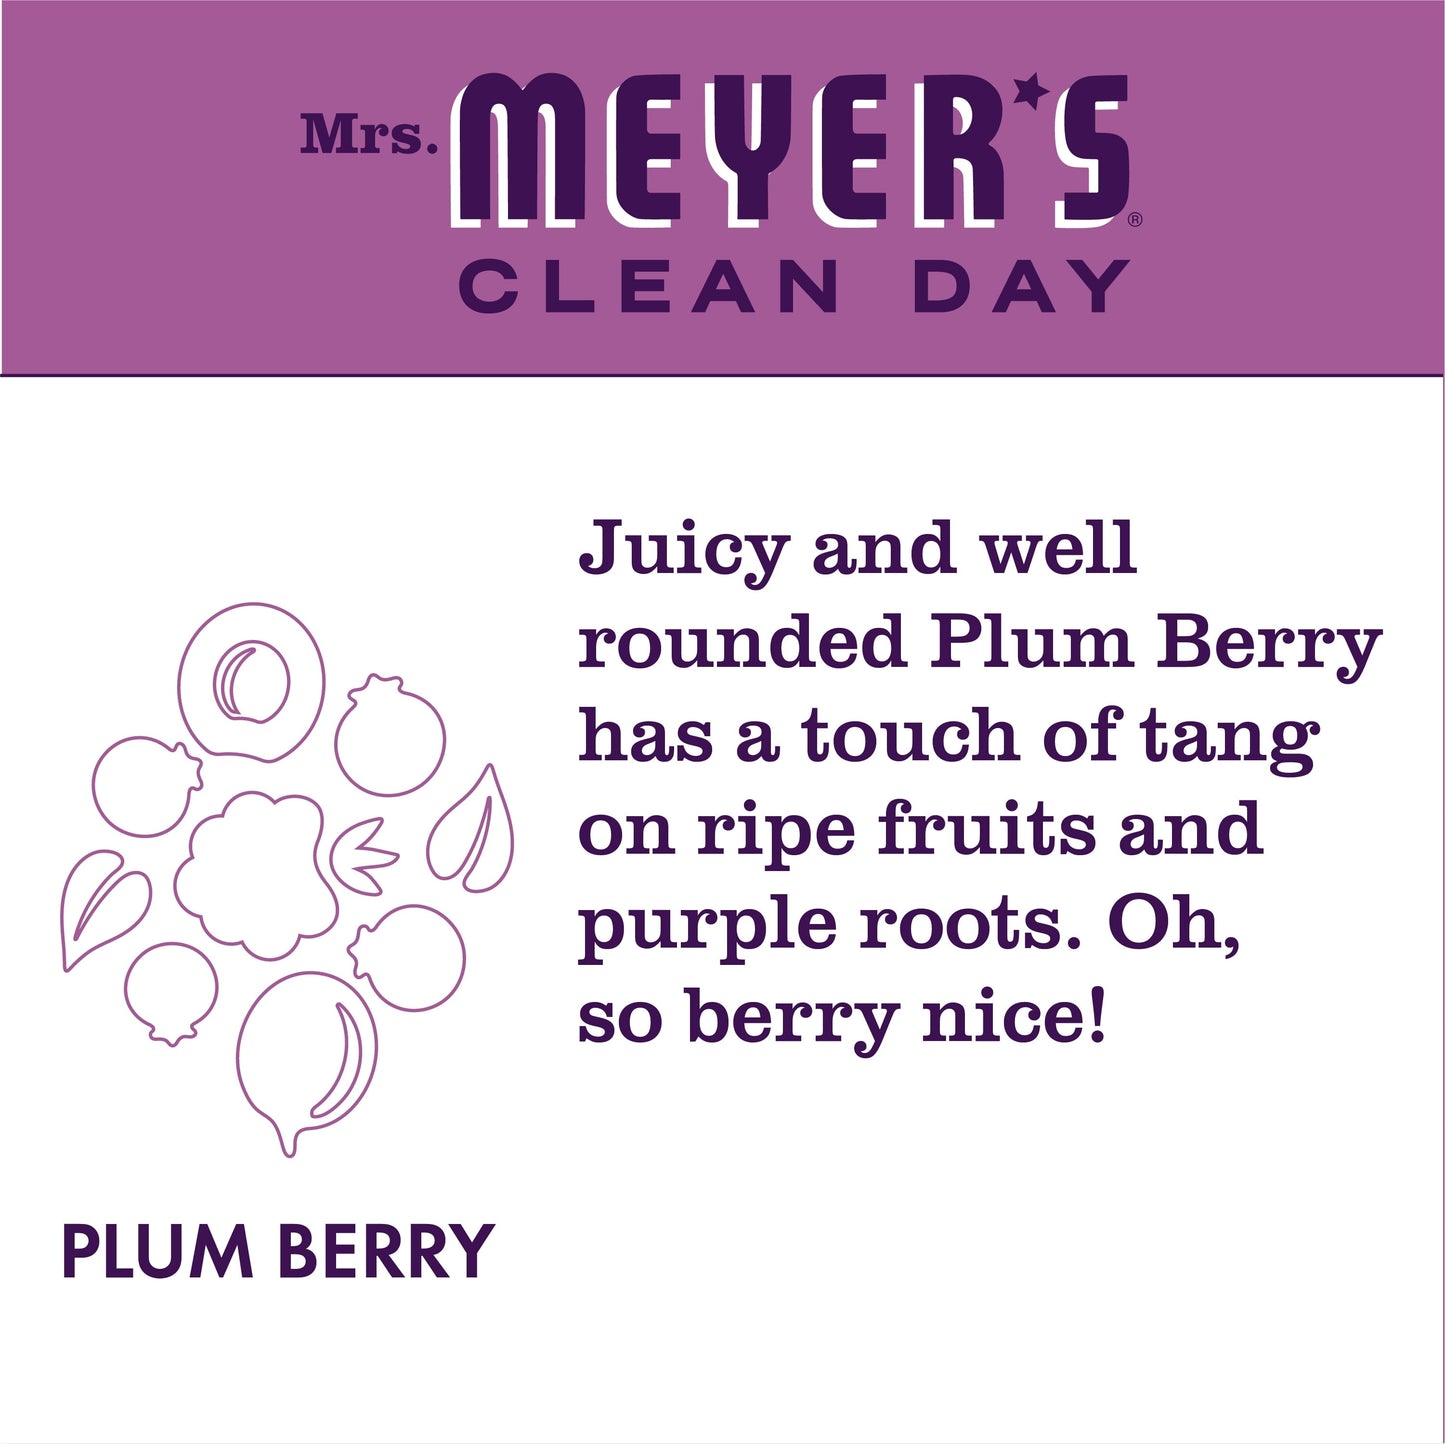 Mrs. Meyer's Clean Day Liquid Hand Soap, Plum Berry Scent, 12.5 Ounce Bottle